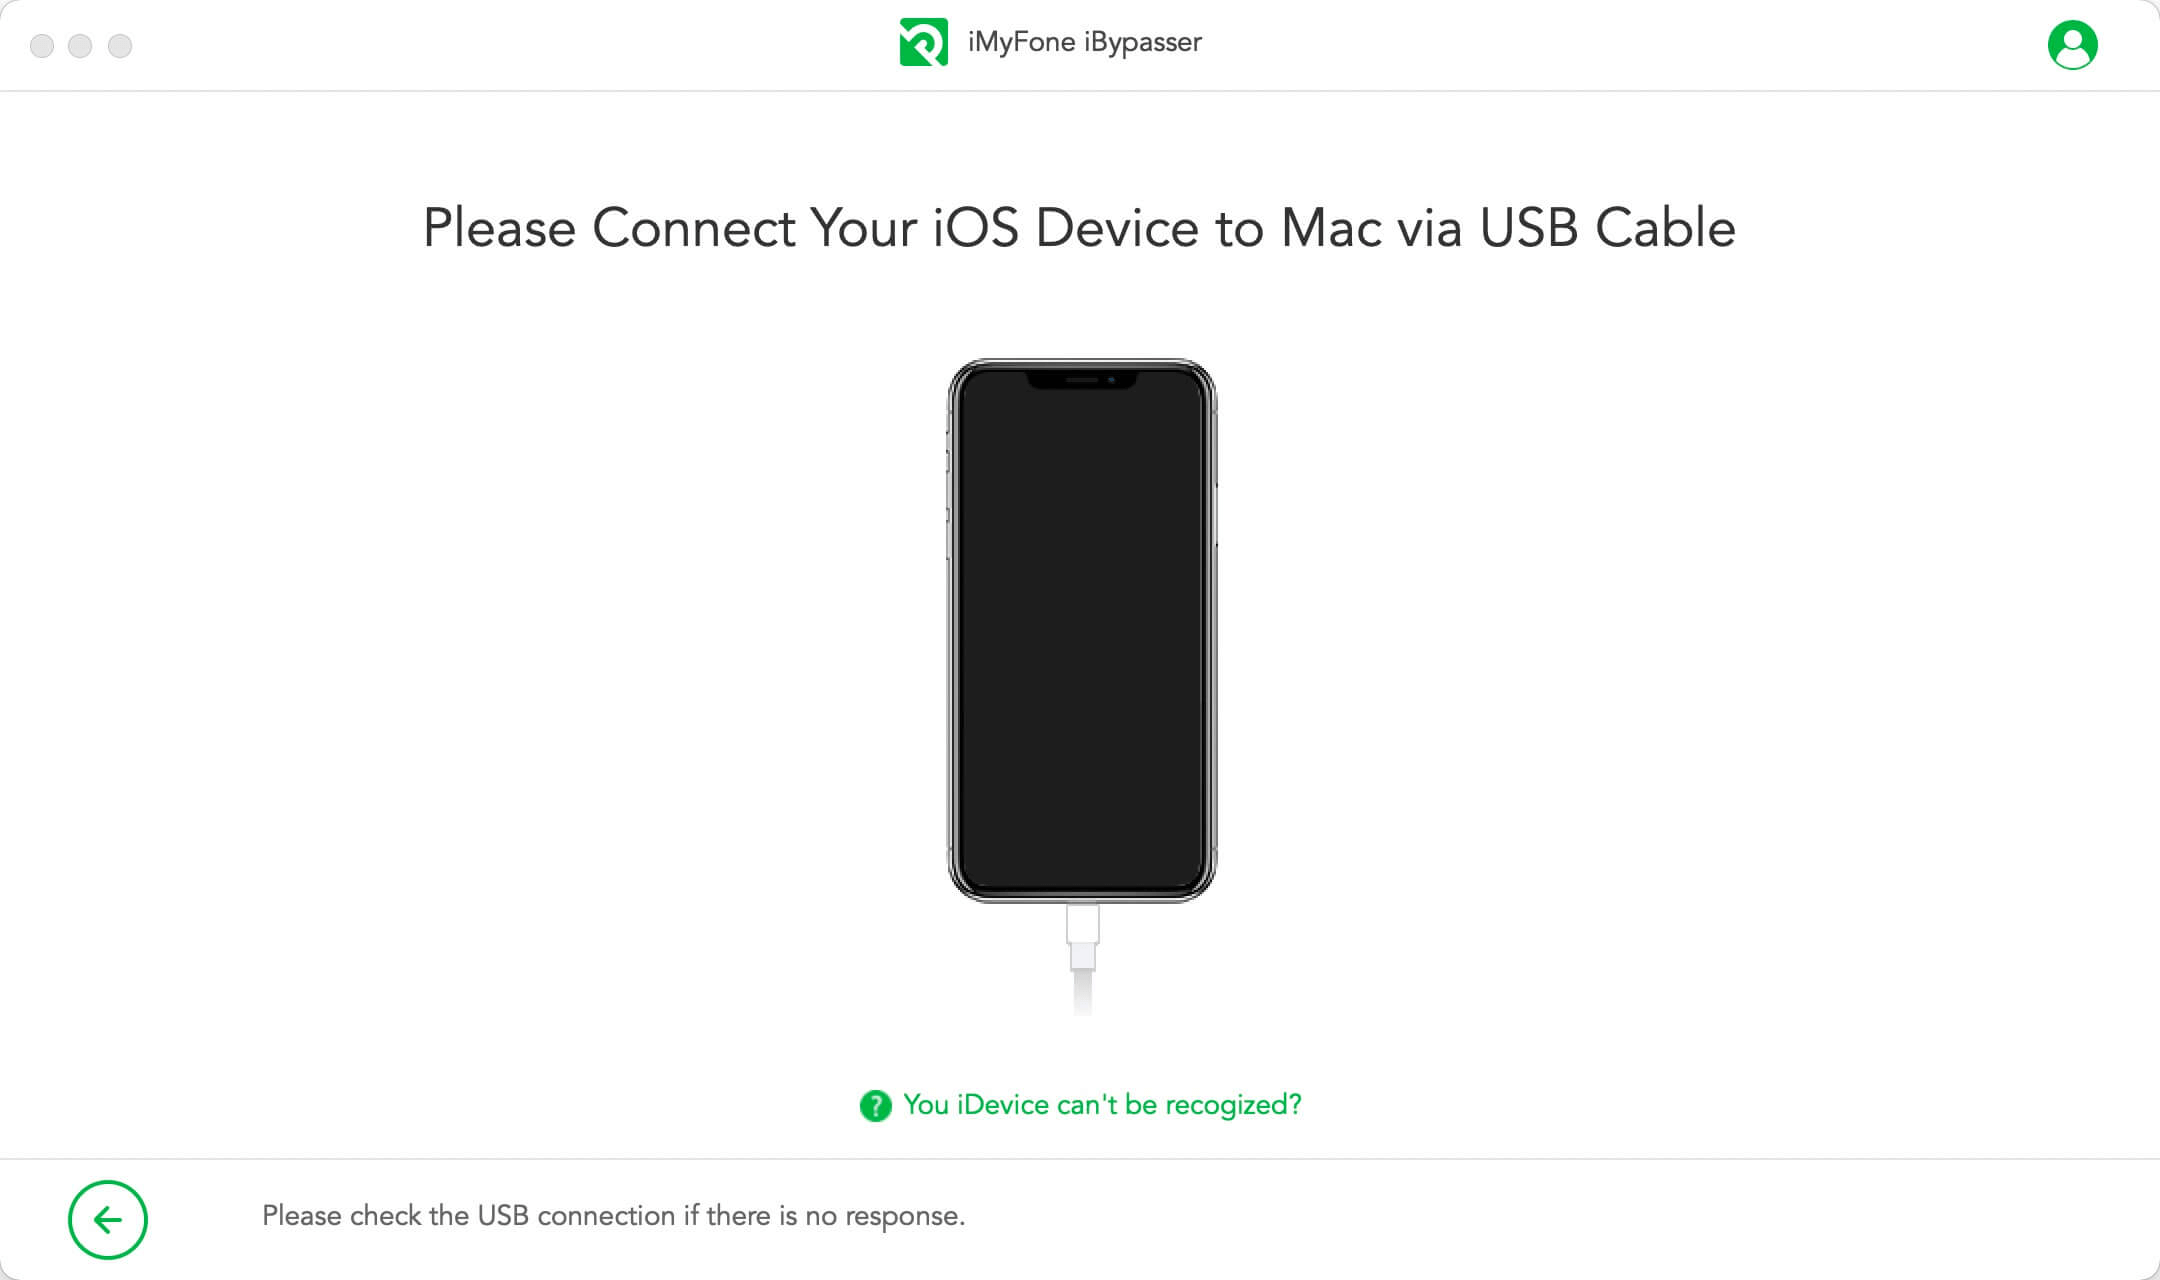 connect your ios device to mac via usb